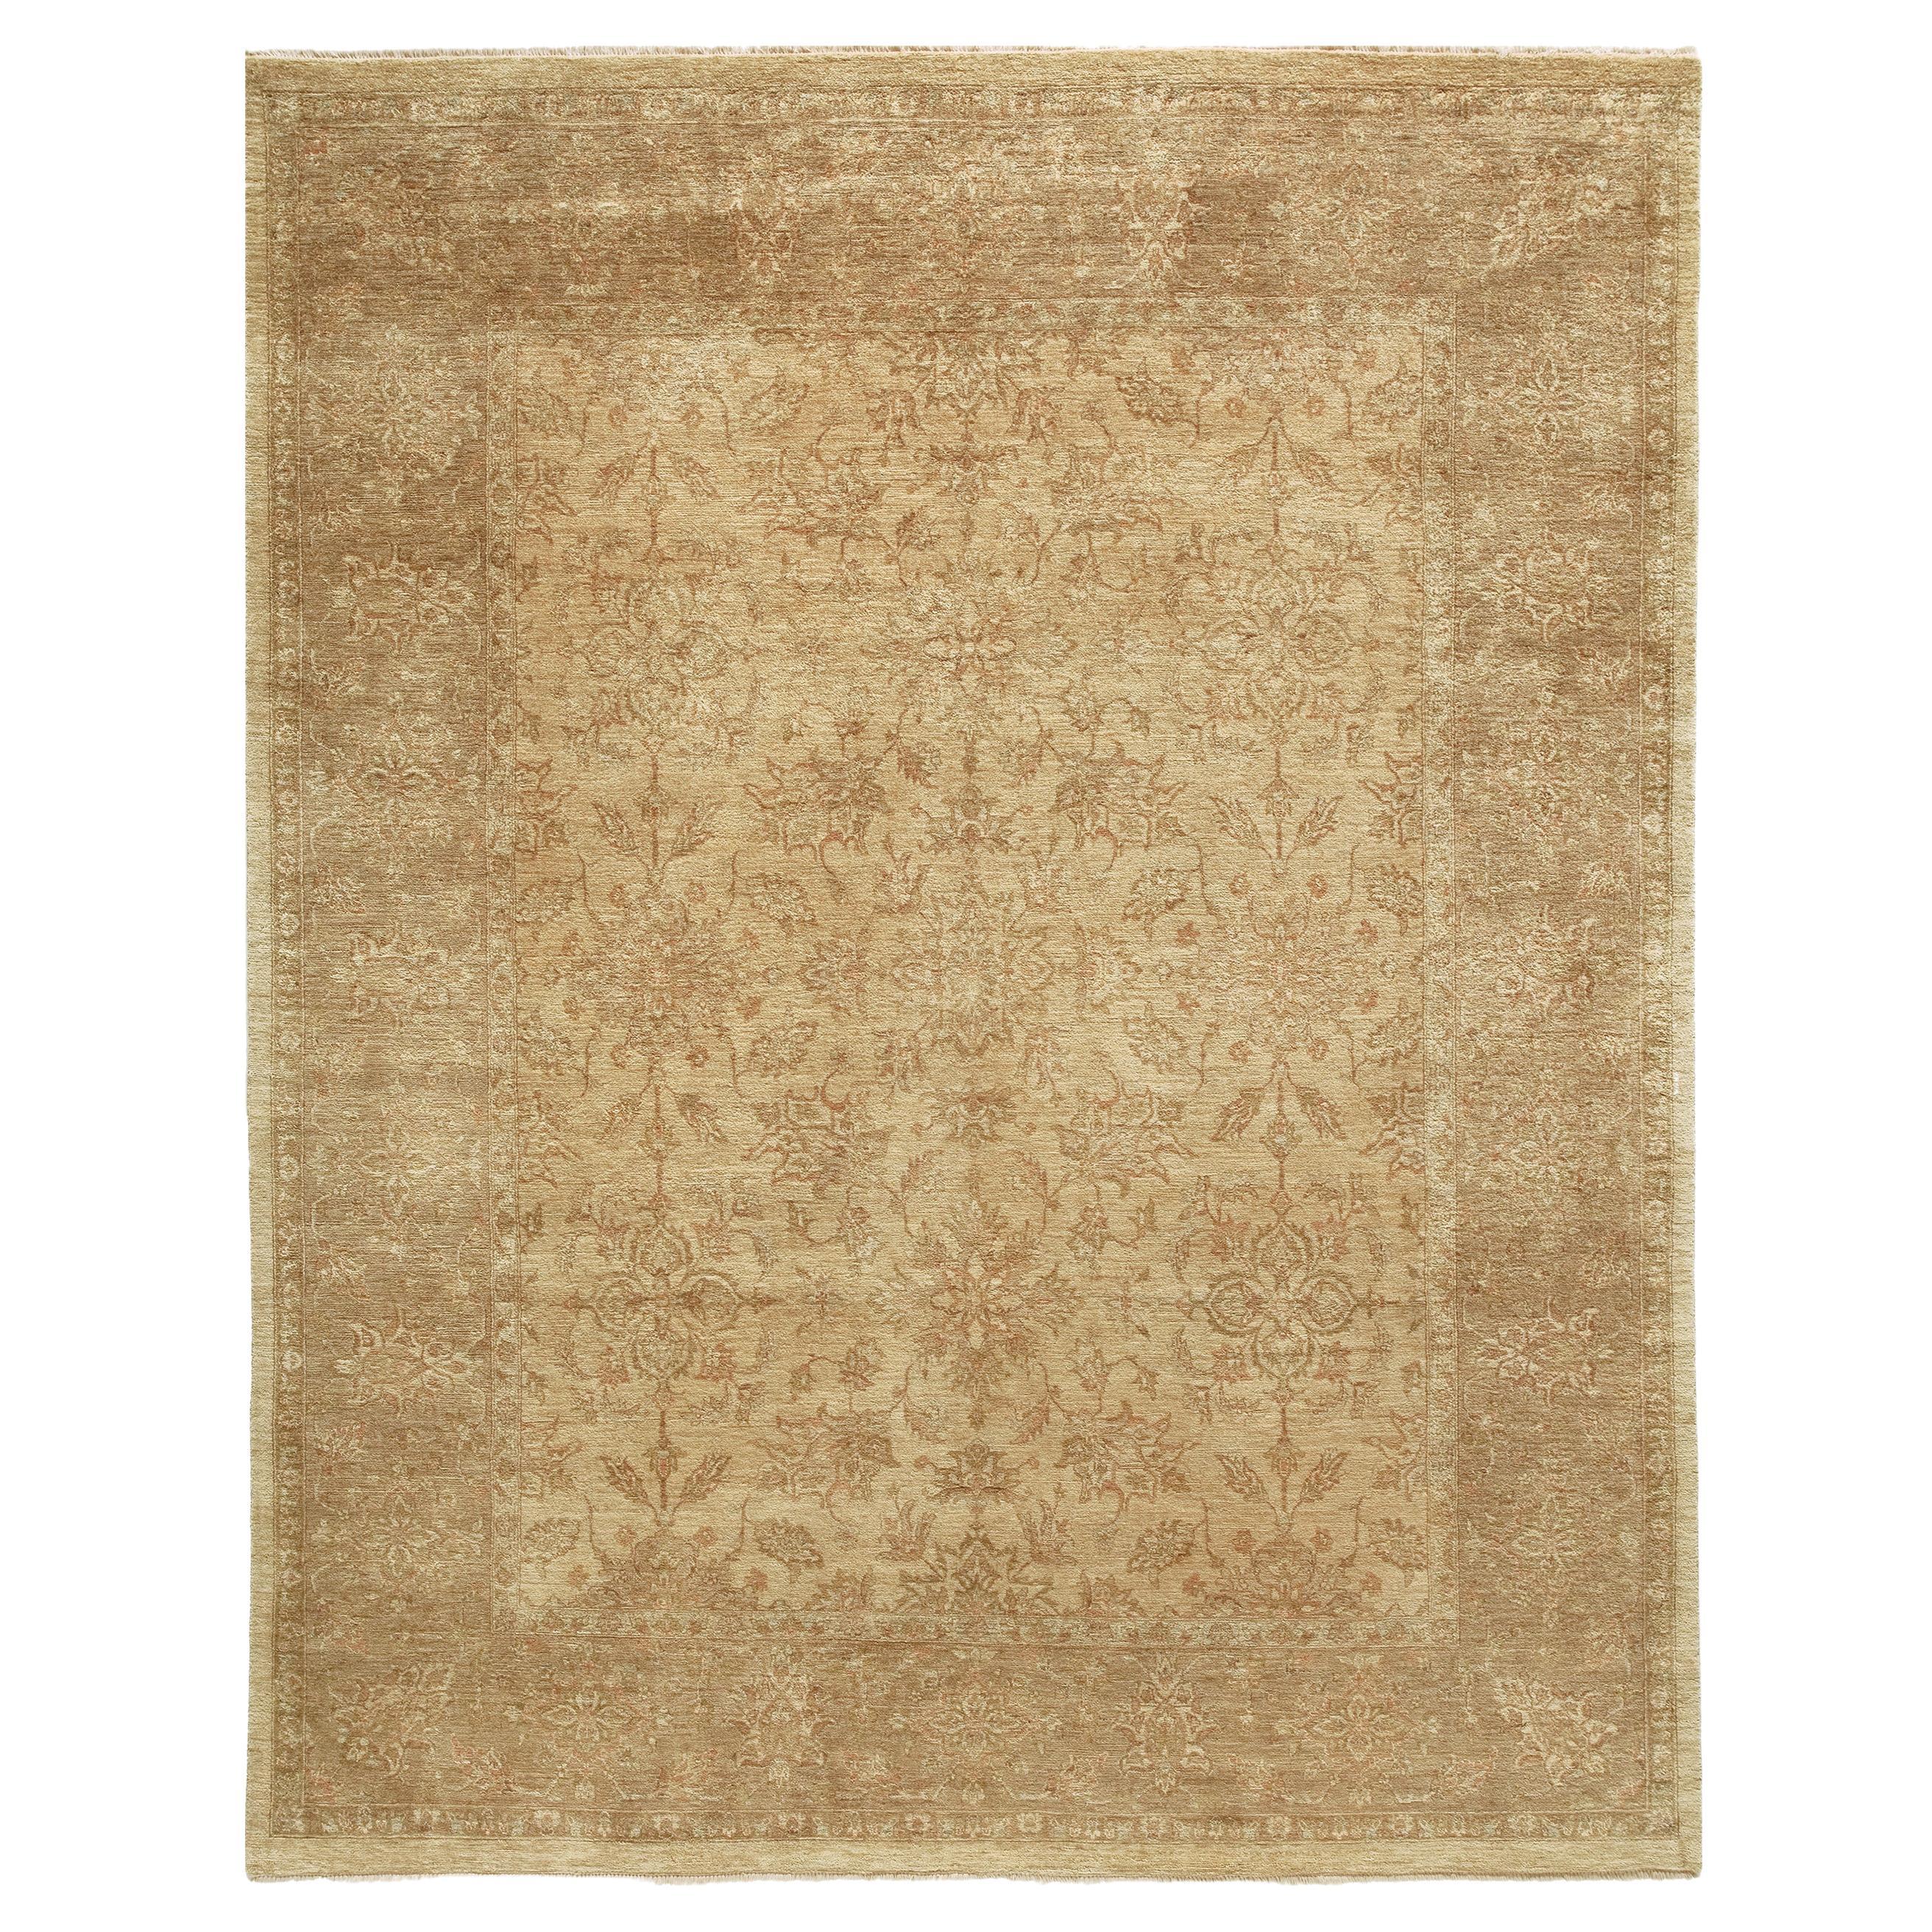 Luxury Traditional Hand-Knotted Doroksh Cream and Gold 12x18 Rug